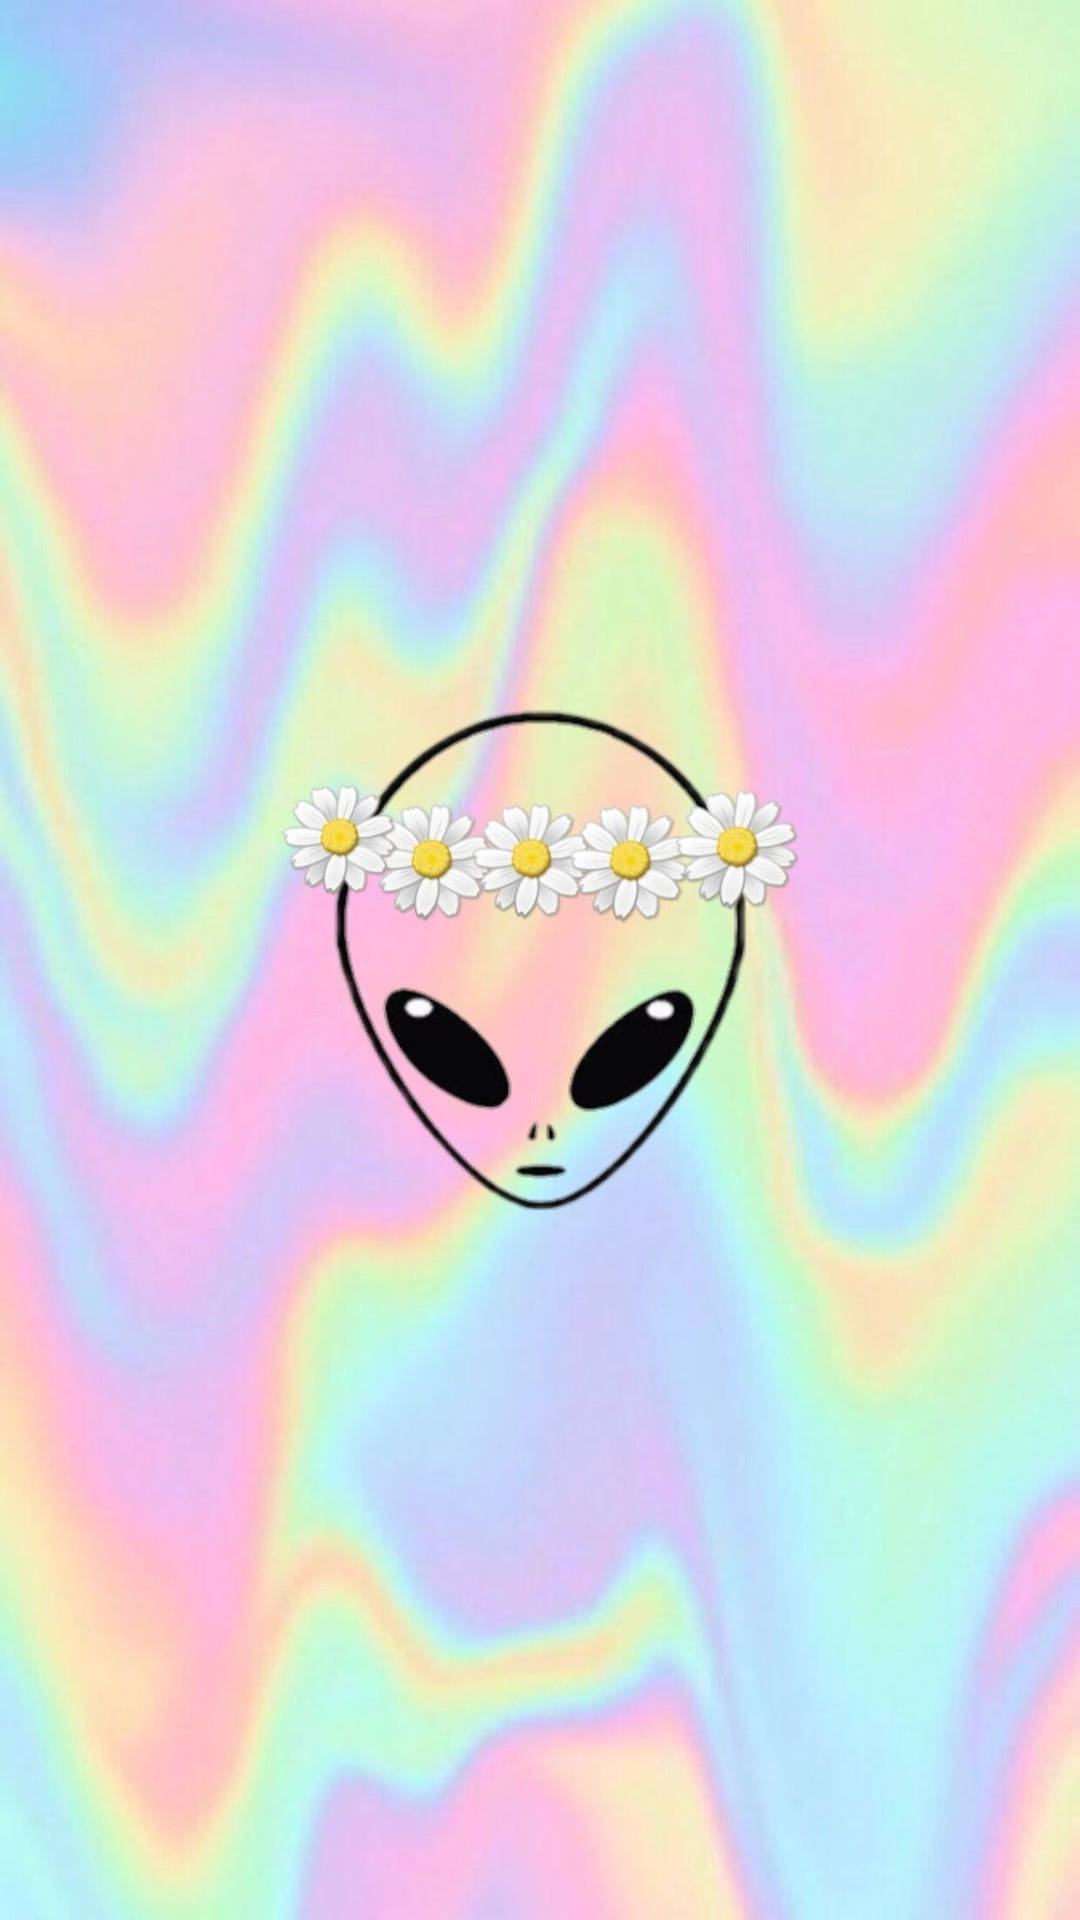 Cool Alien With A Floral Crown Wallpaper